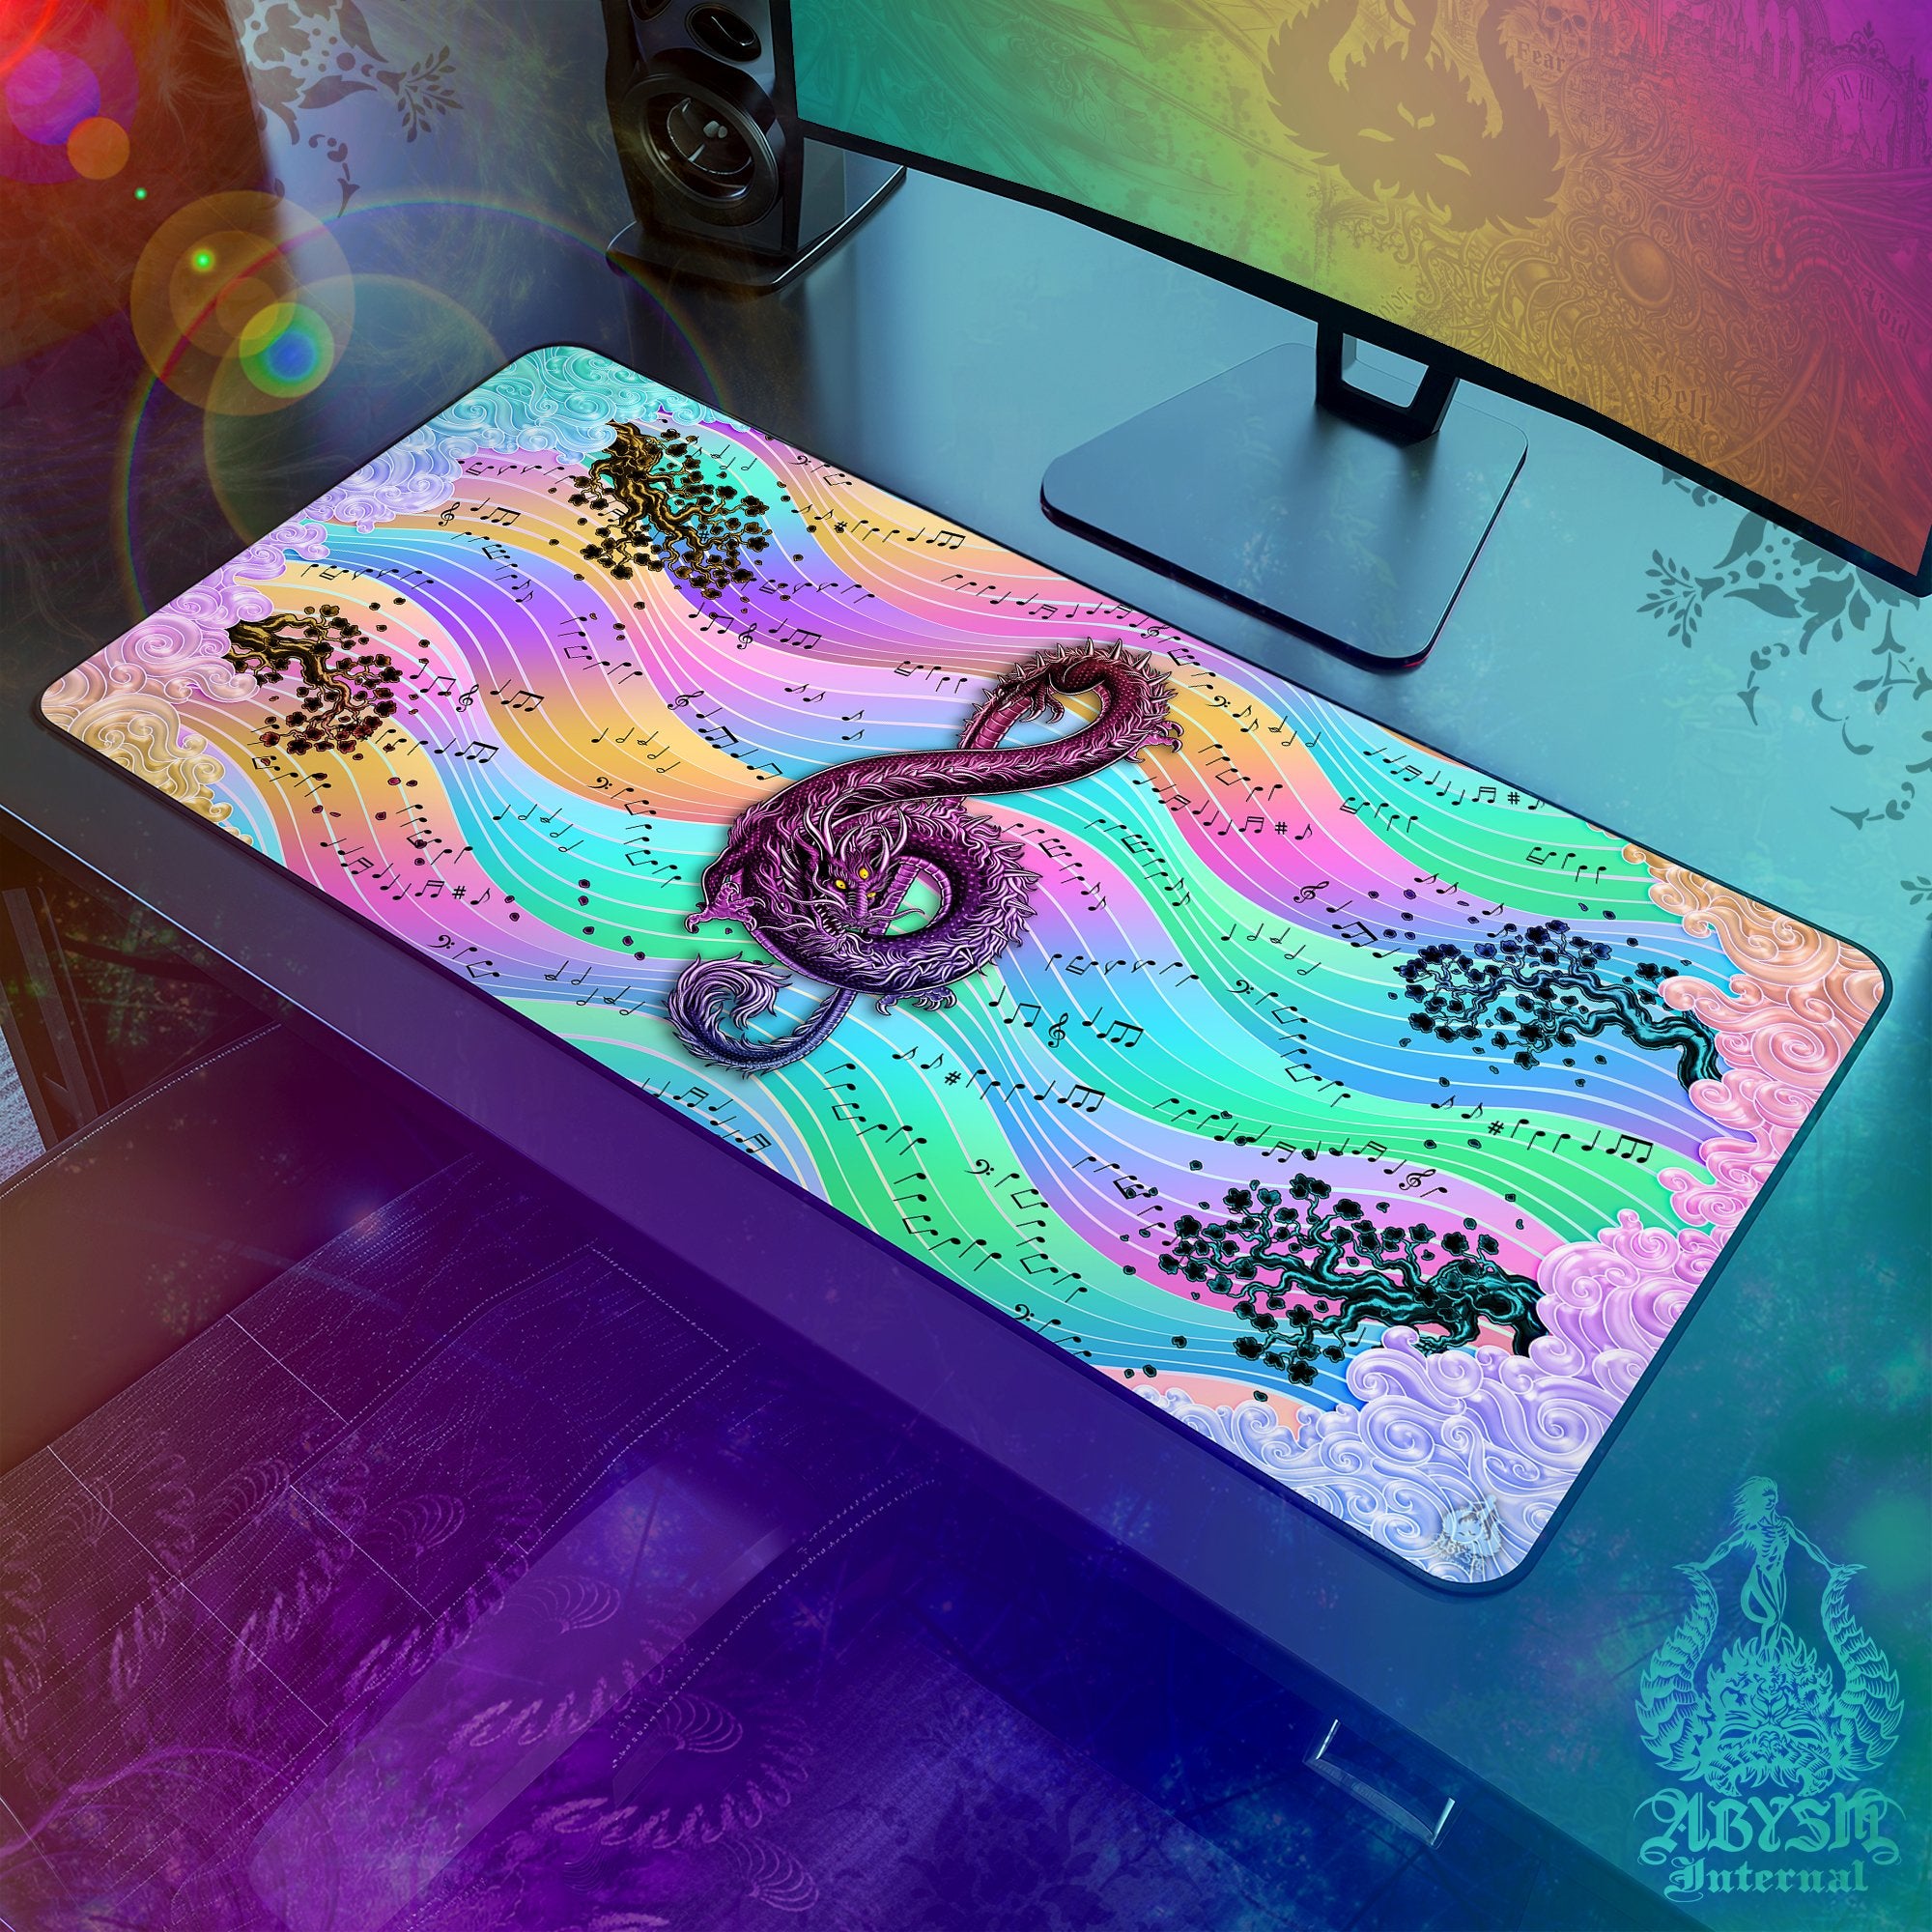 Music Gaming Mouse Pad, Psychedelic Dragon Desk Mat, Girl Gamer Table Protector Cover, Pastel Black Workpad, Asian Treble Clef Art Print - 2 Options - Abysm Internal